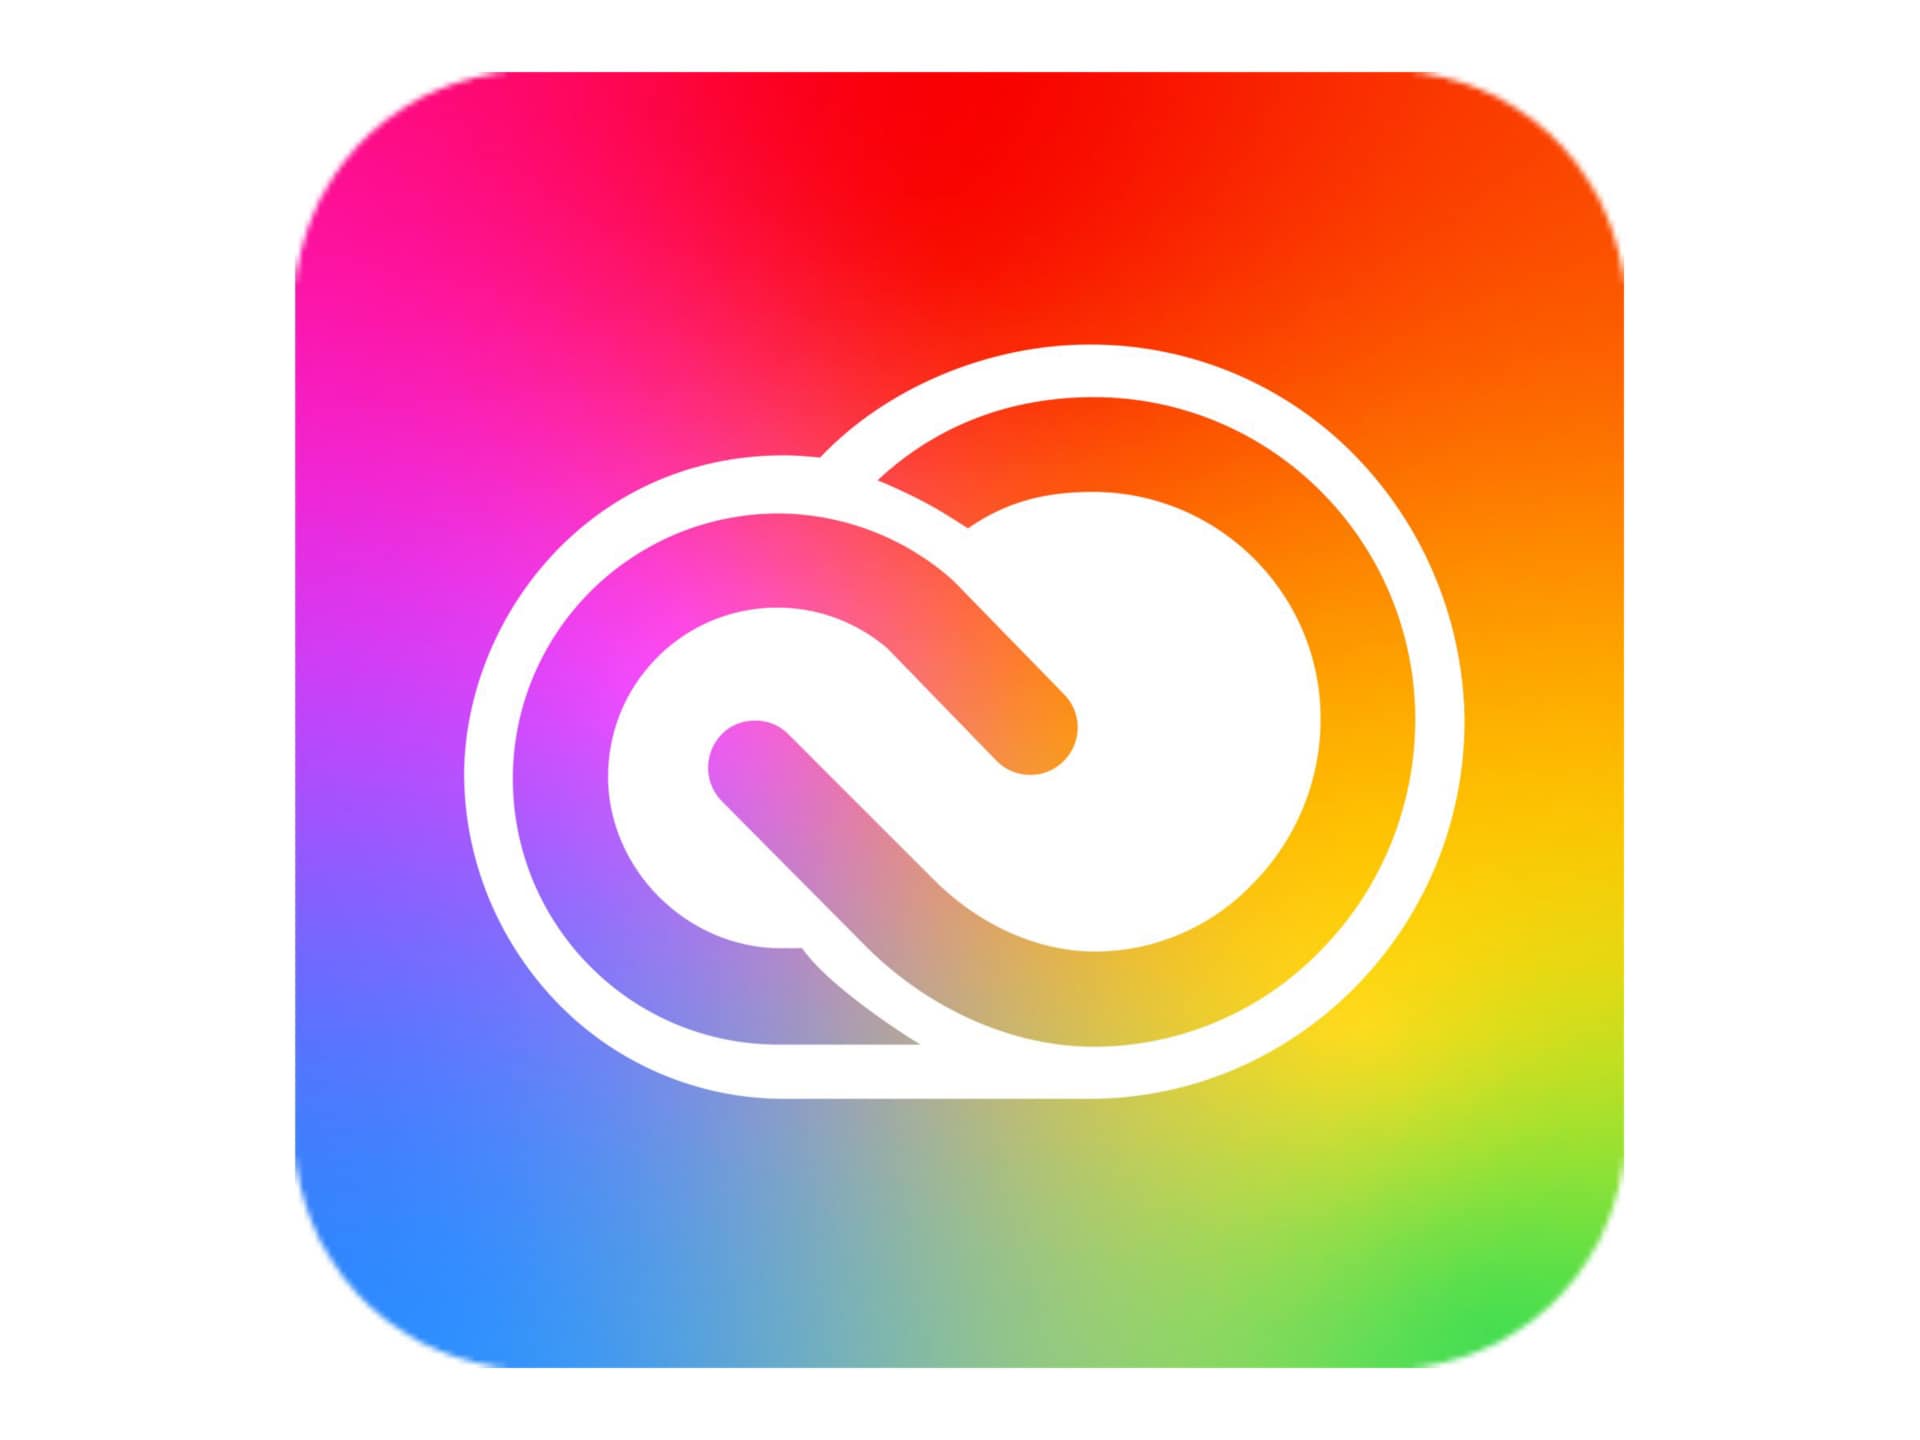 Adobe Creative Cloud for Enterprise - All Apps - Subscription New (9 months) - 1 named user